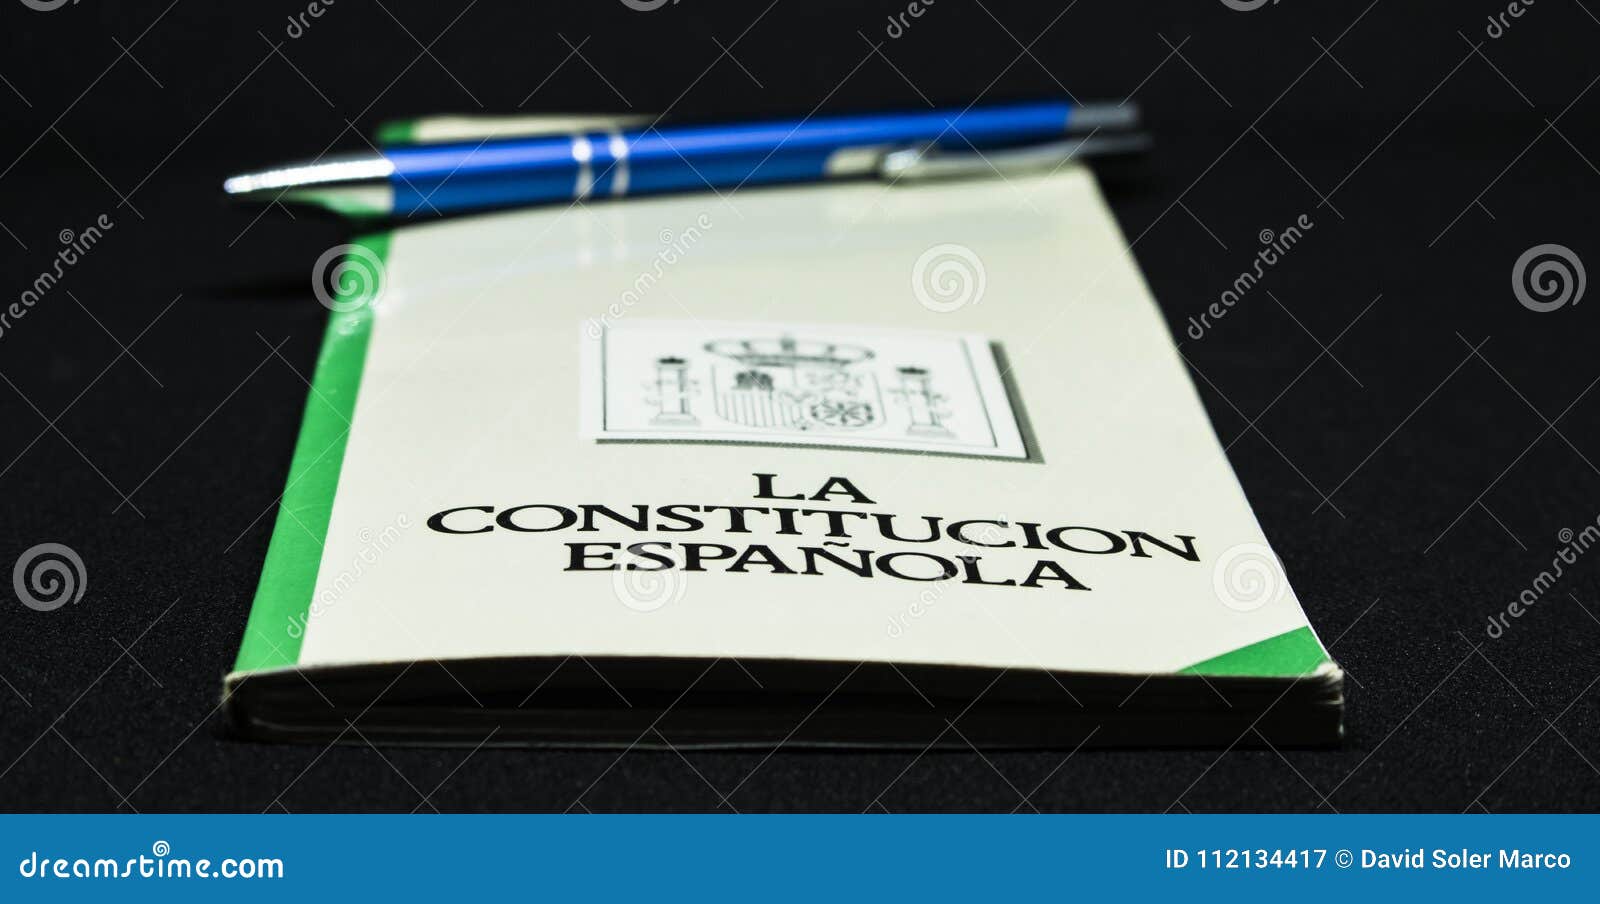 book of the spanish constitution wiht a pen and the graphical white background